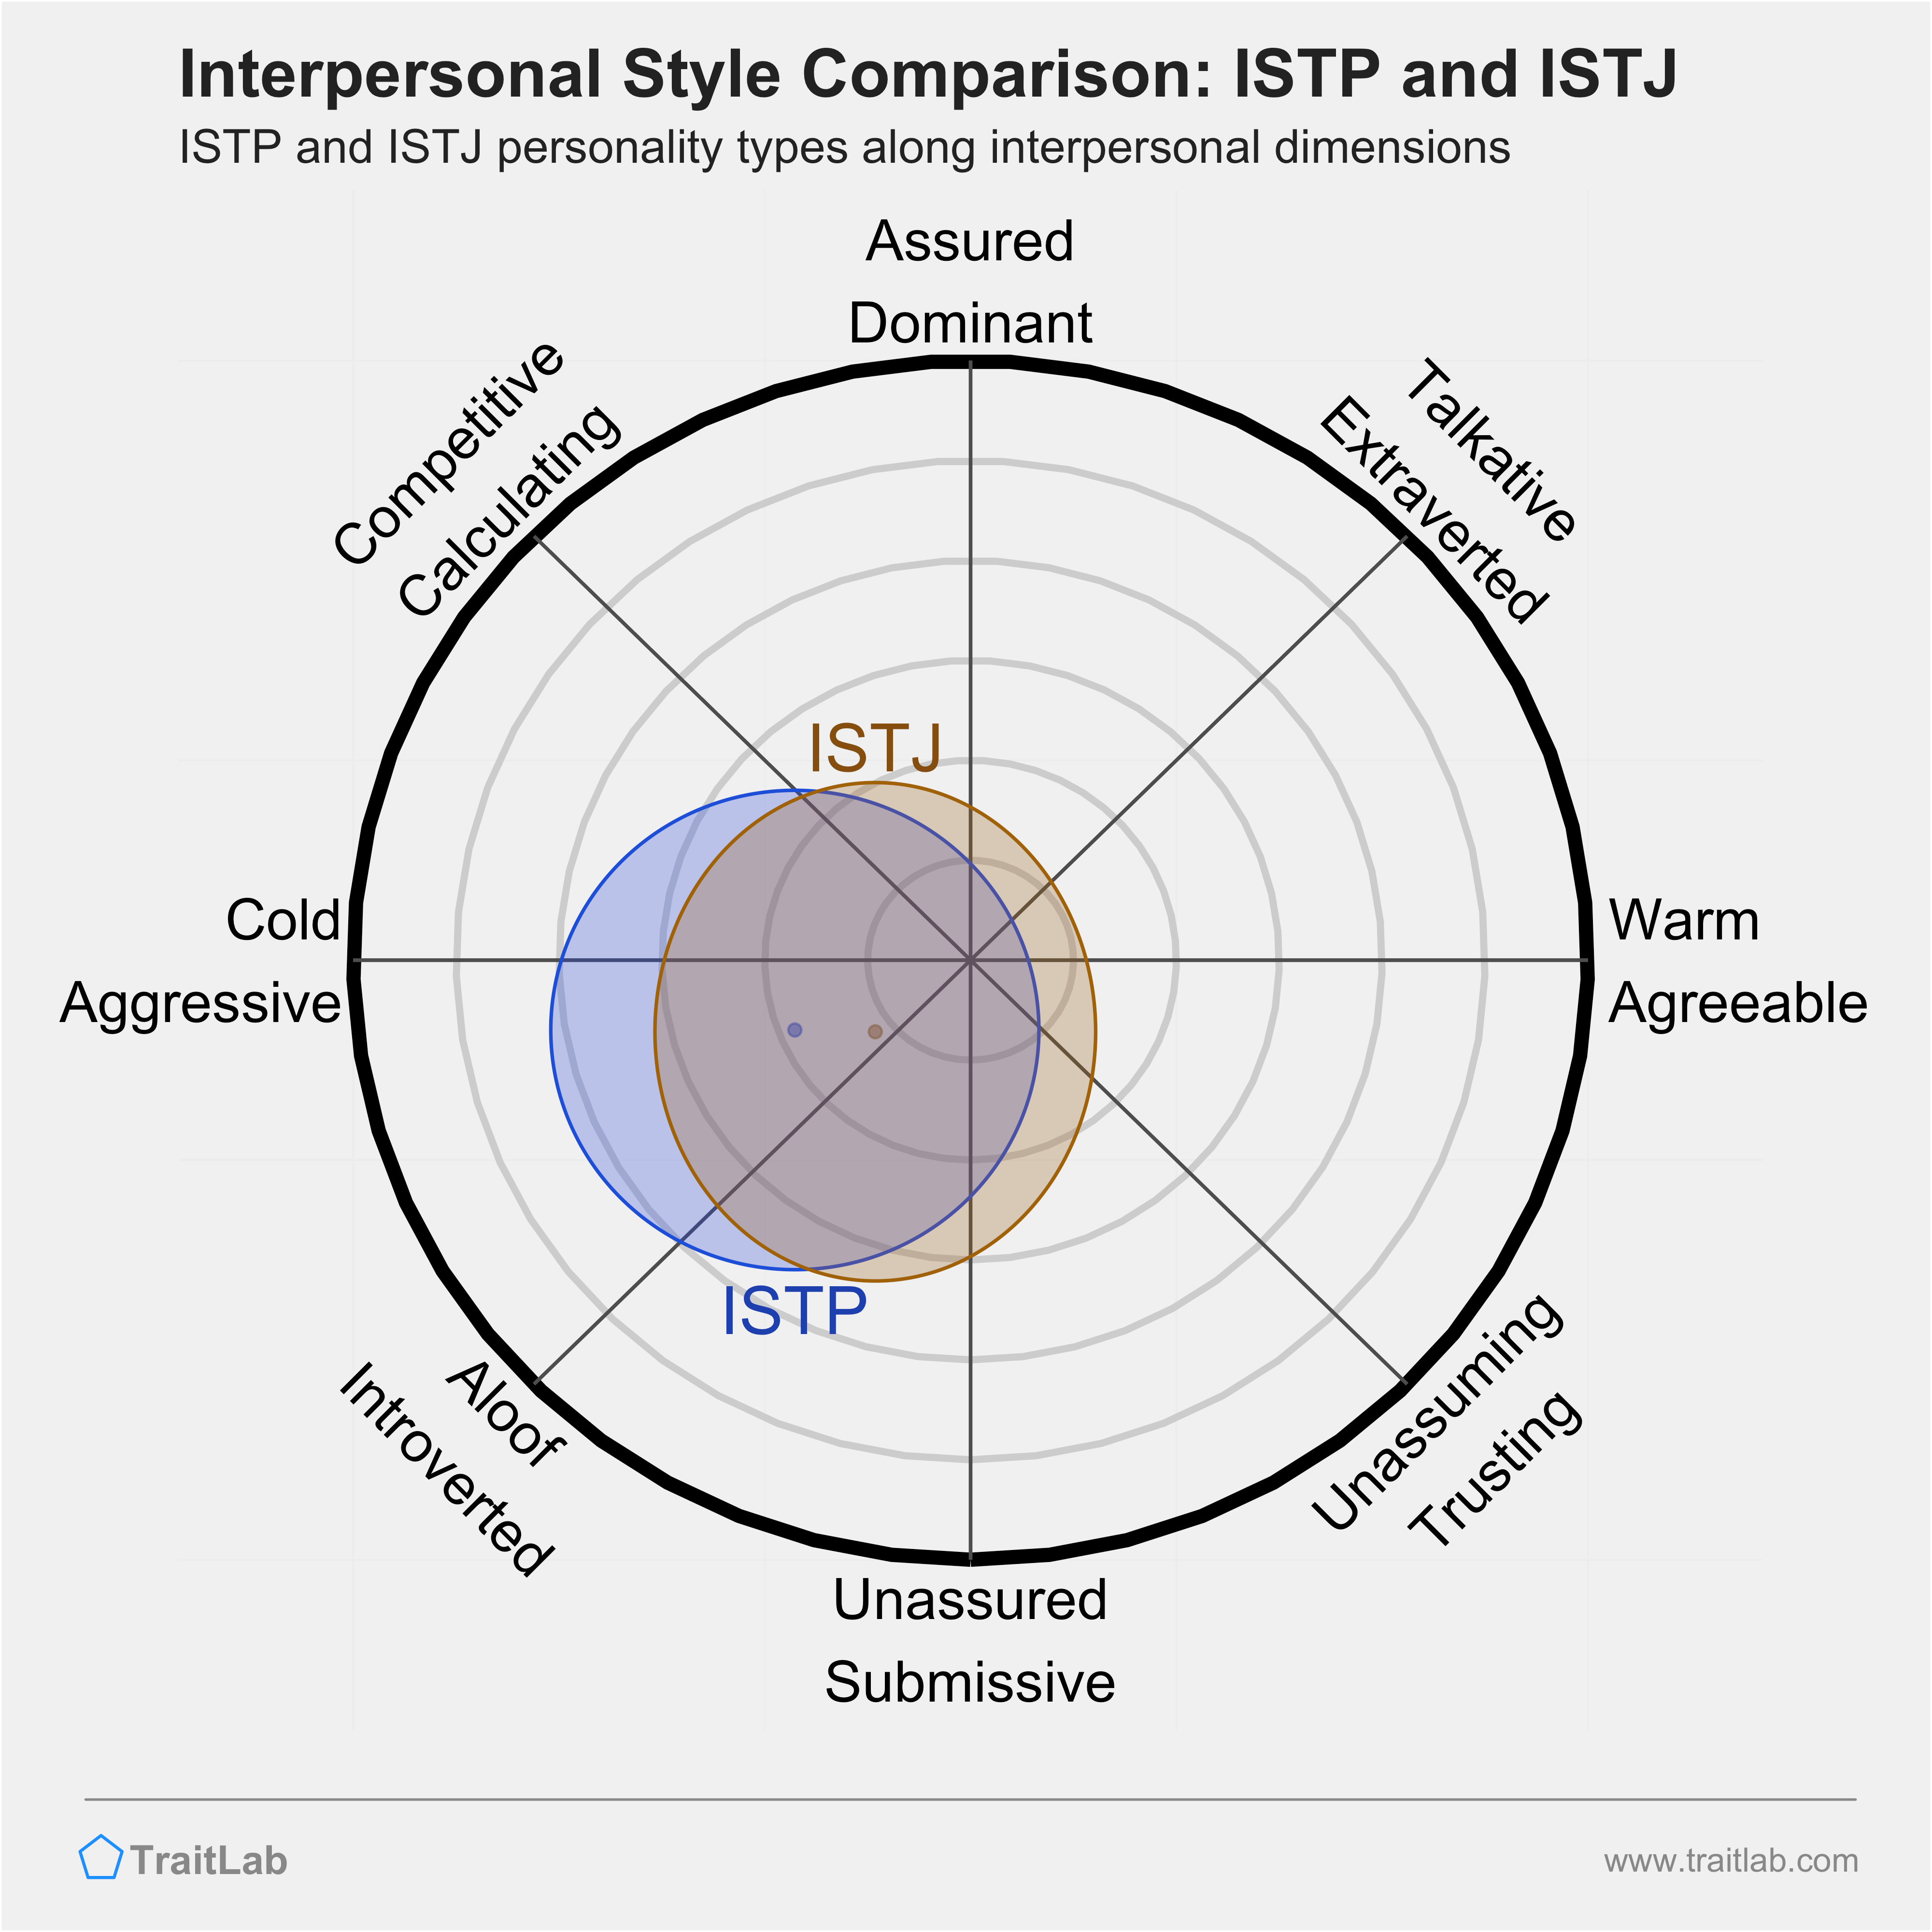 ISTP and ISTJ comparison across interpersonal dimensions